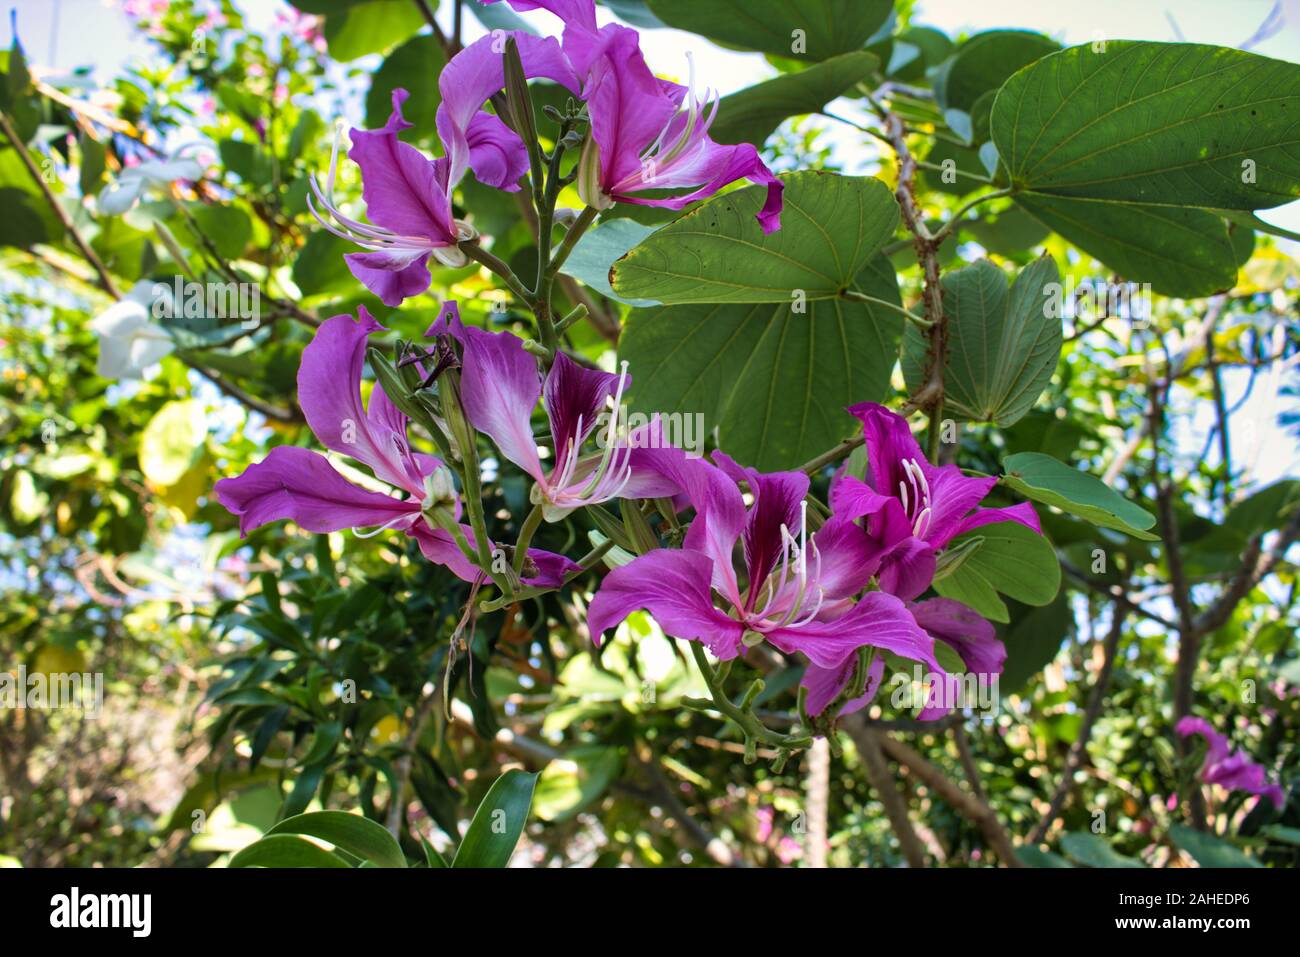 In this unique photo you can see a Purple Tropical Flowers on a Tree! Hawaiian orchid tree, blooming in paradise! The photo was taken in Hua Hin Stock Photo